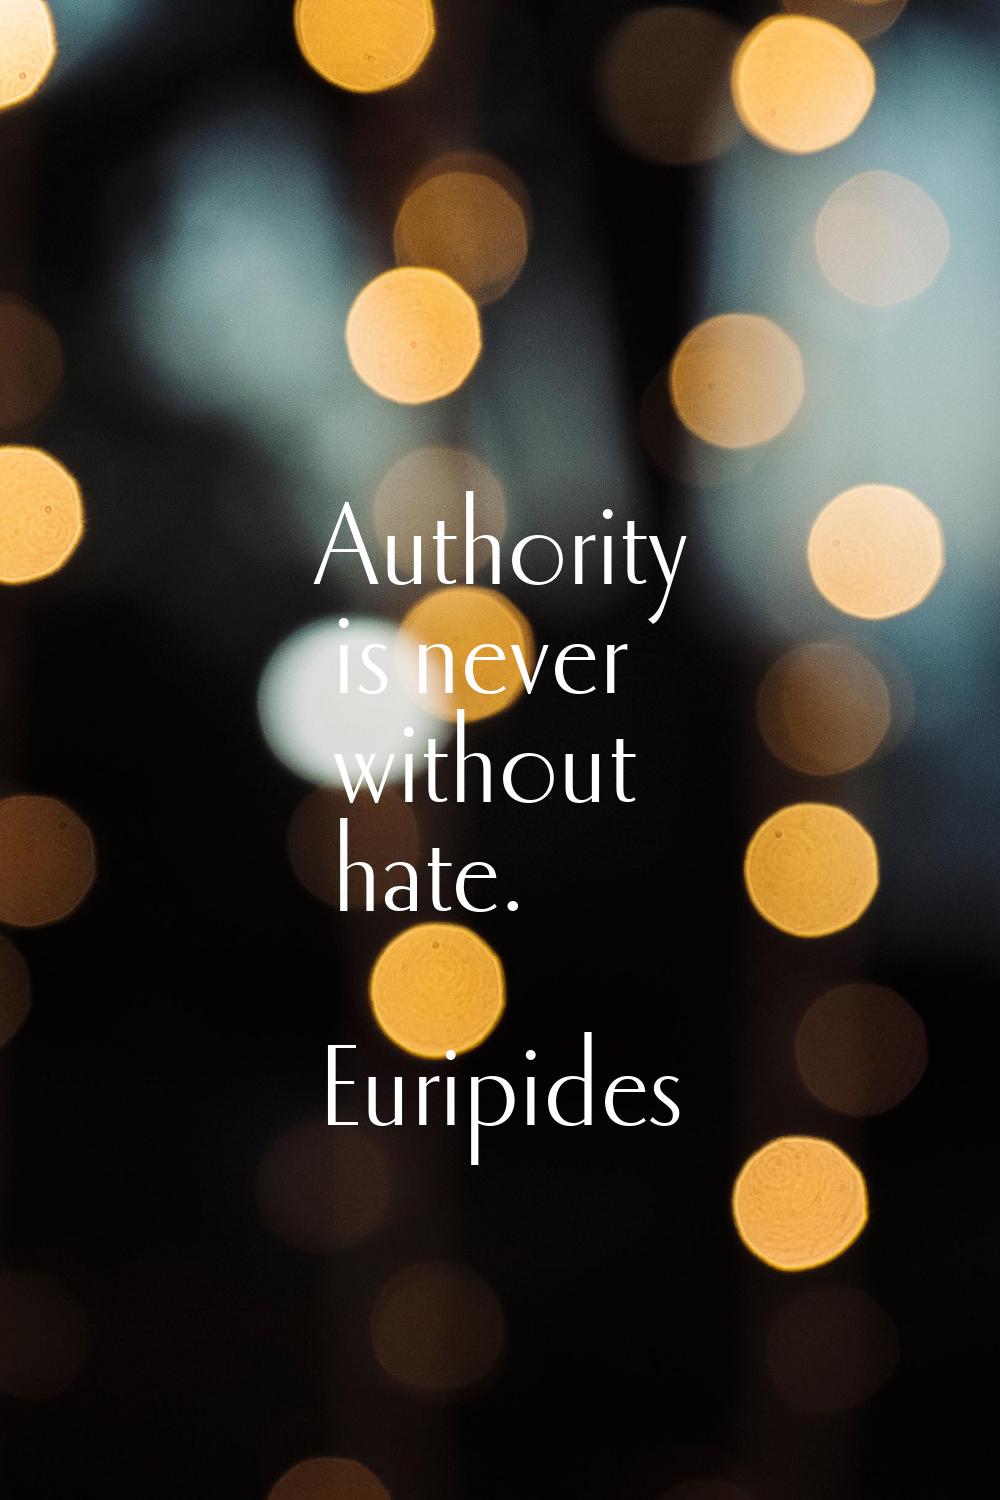 Authority is never without hate.